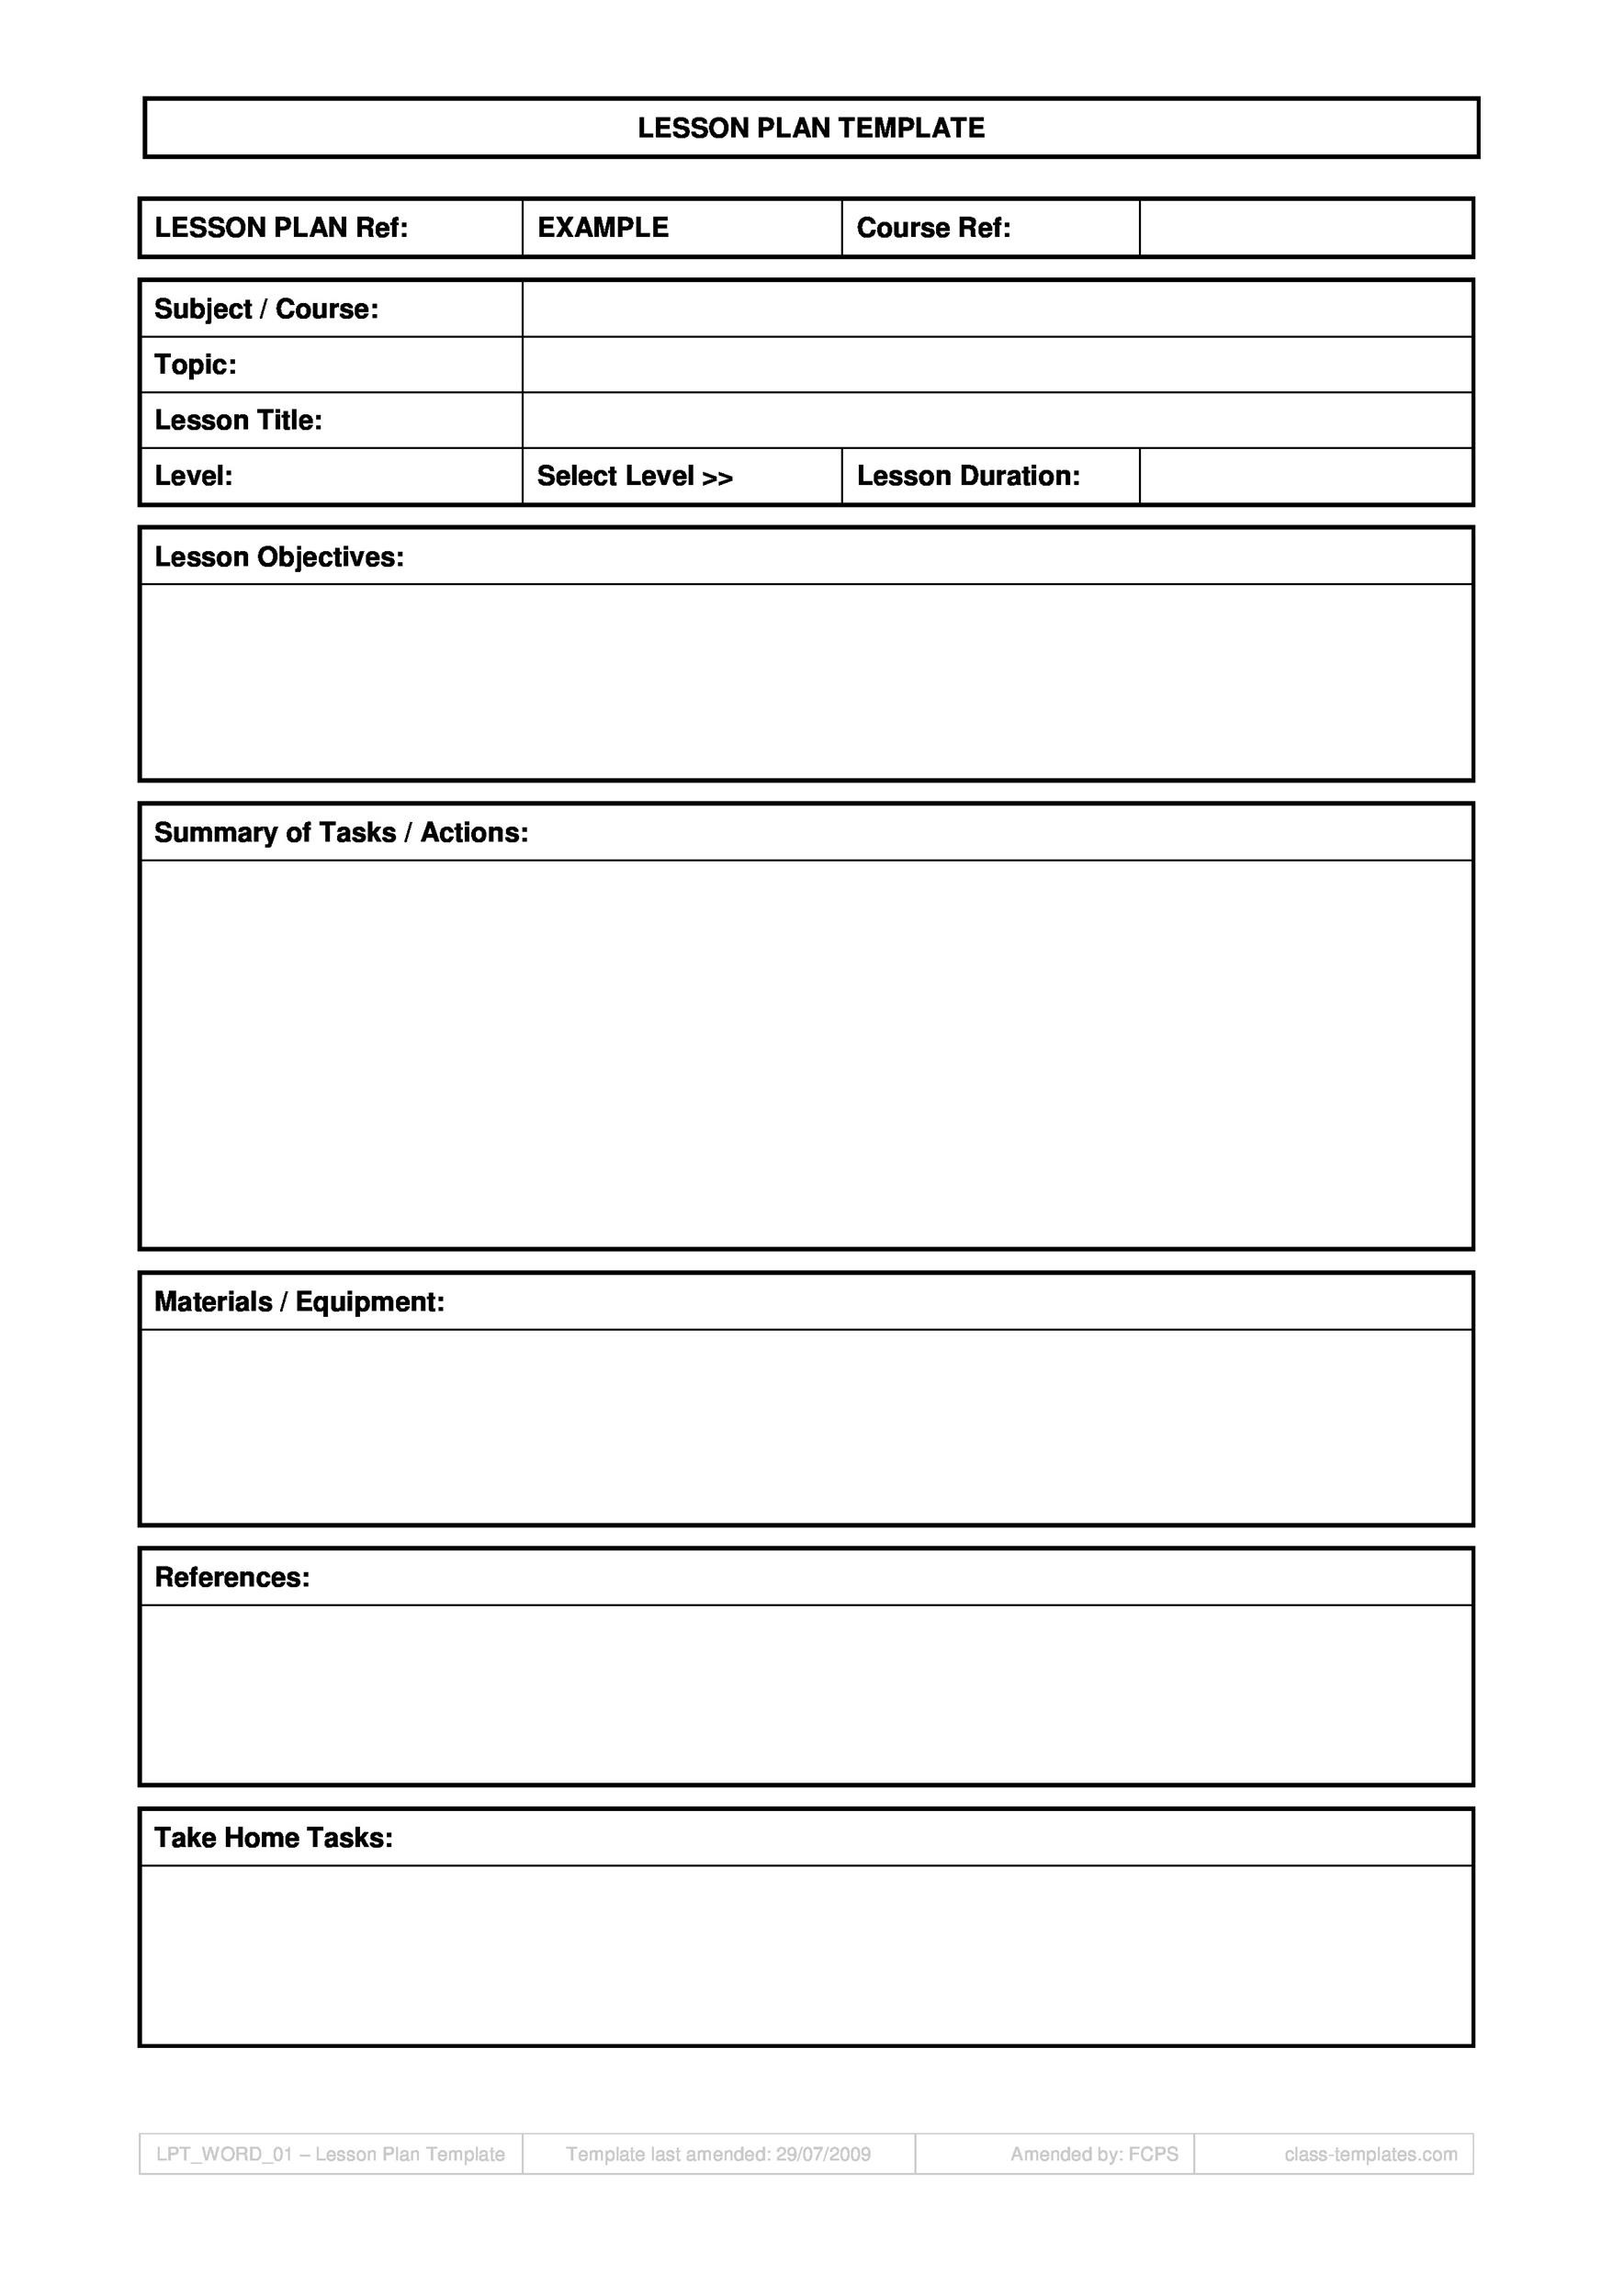 Free lesson plan template 40